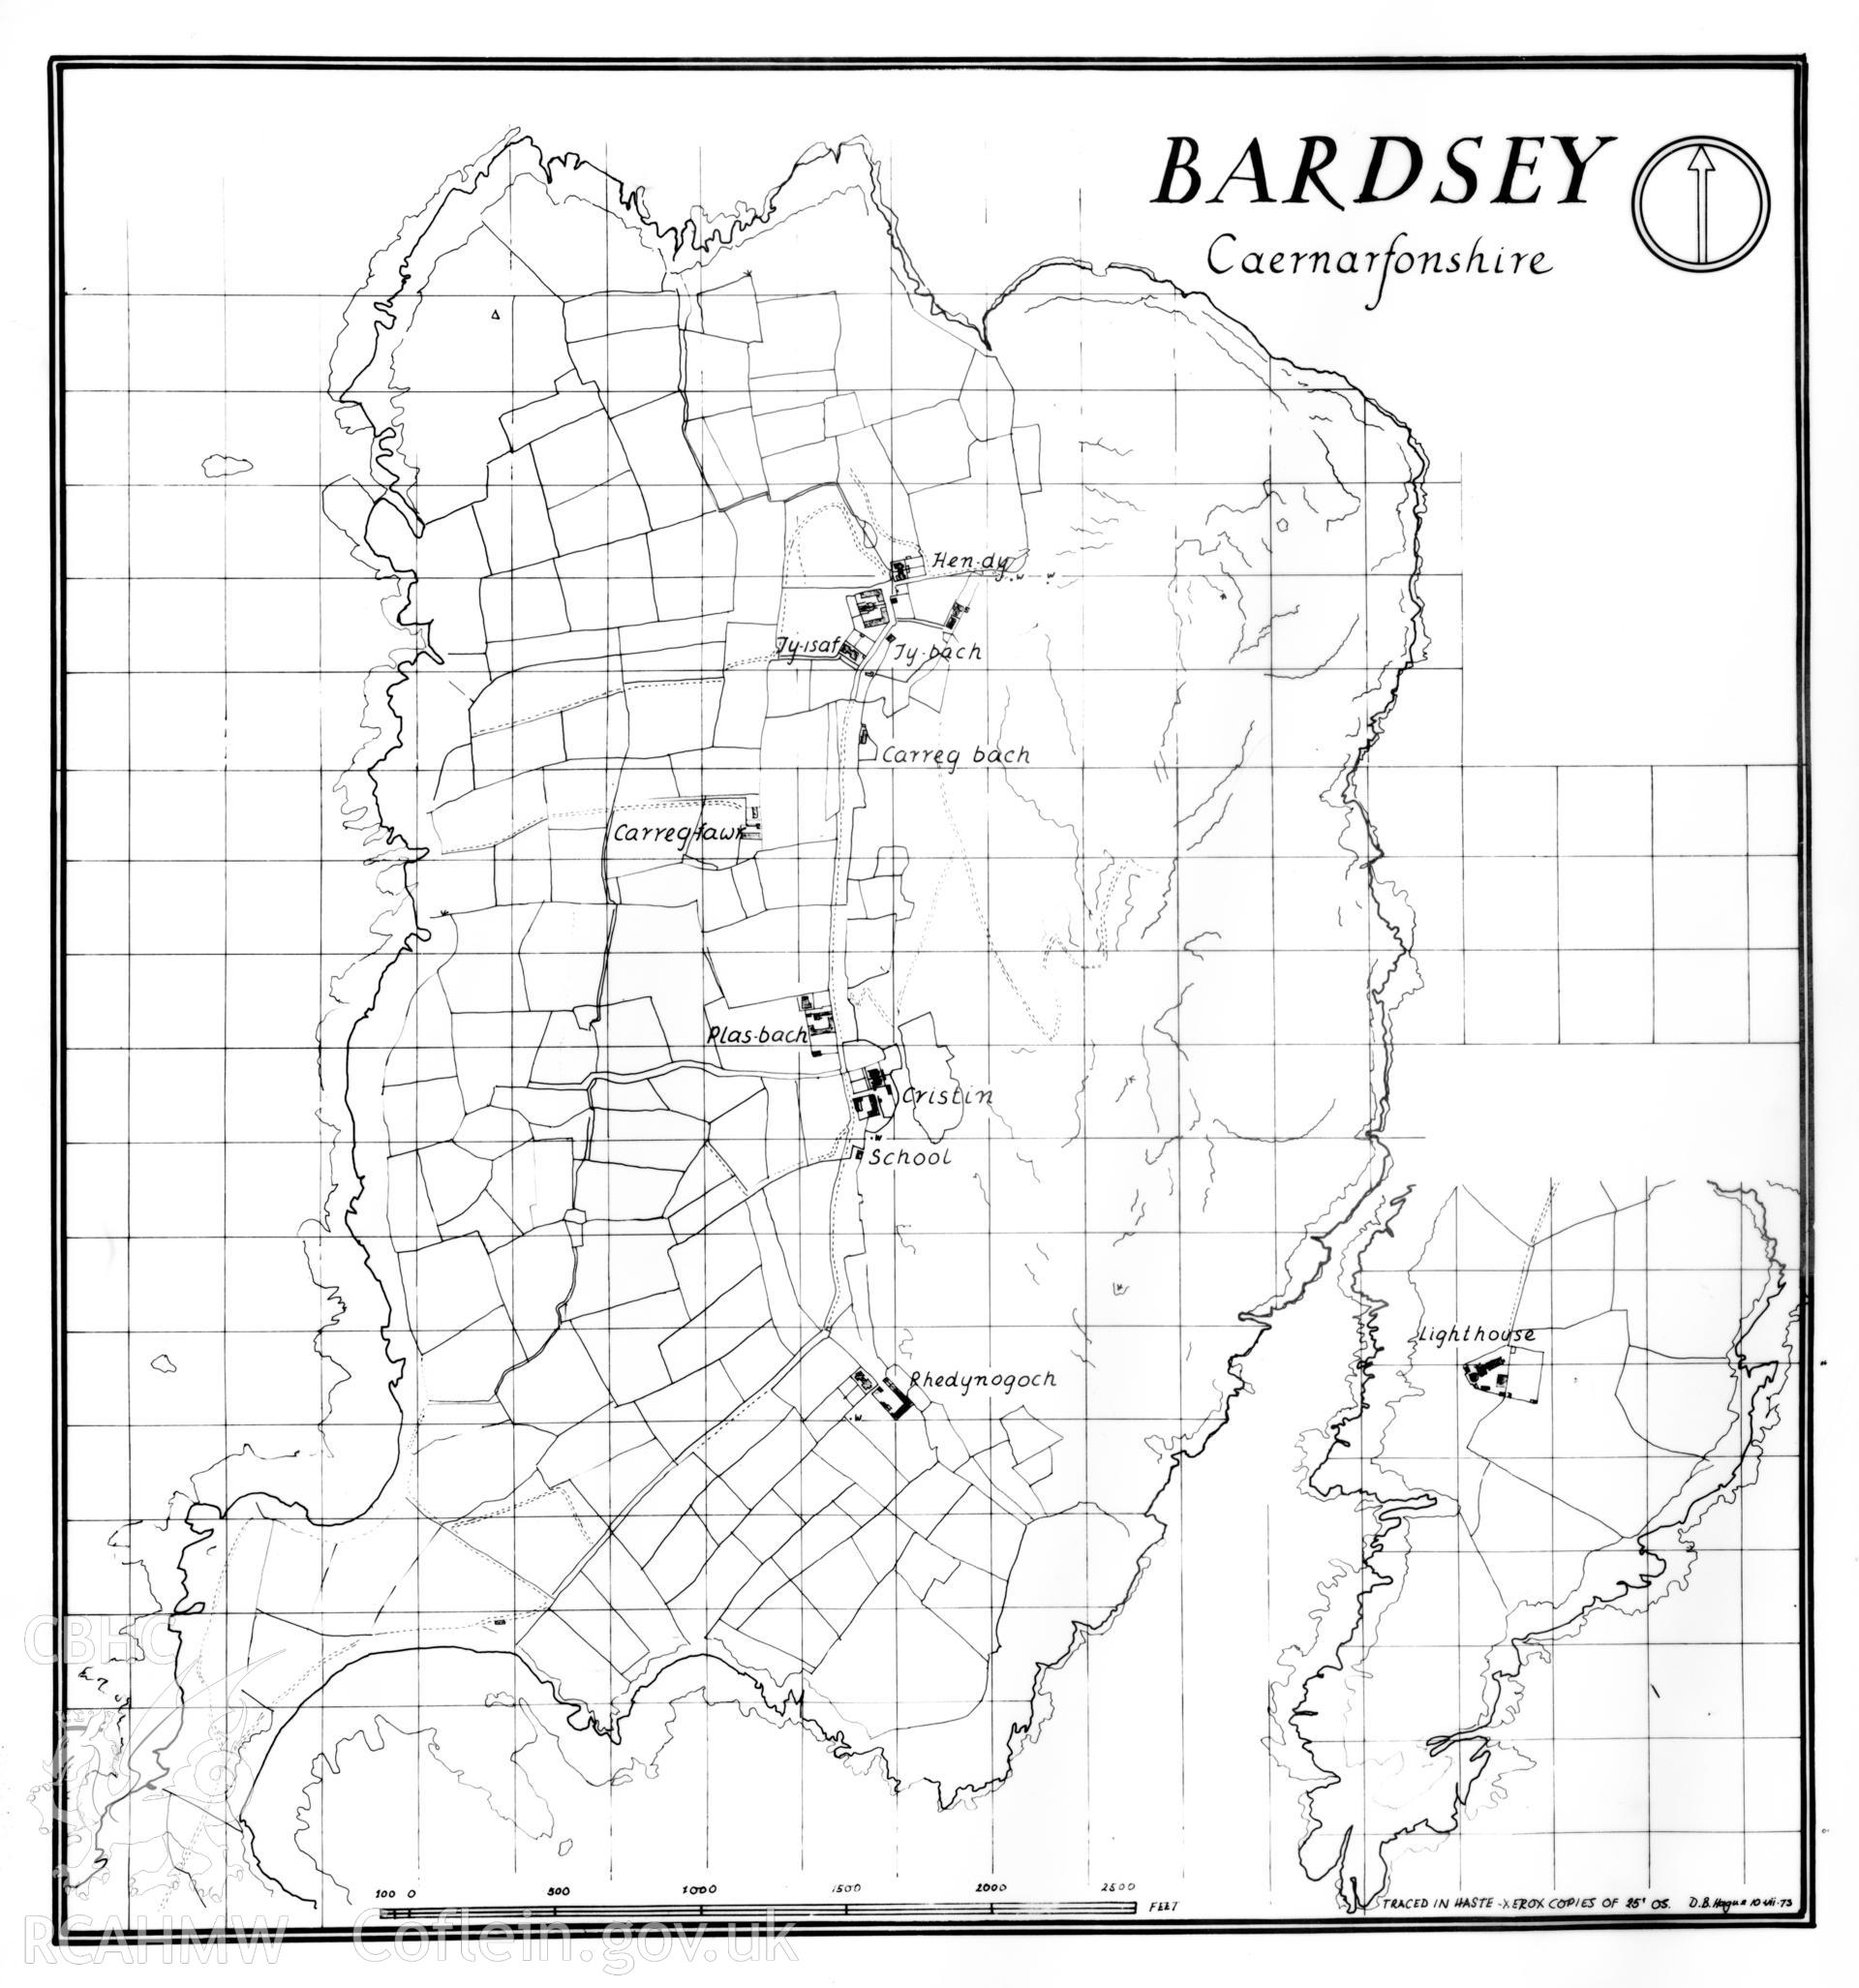 Annotated large scale map showing the location of farmsteads across Bardsey Island, compiled by Douglas Hague 1973